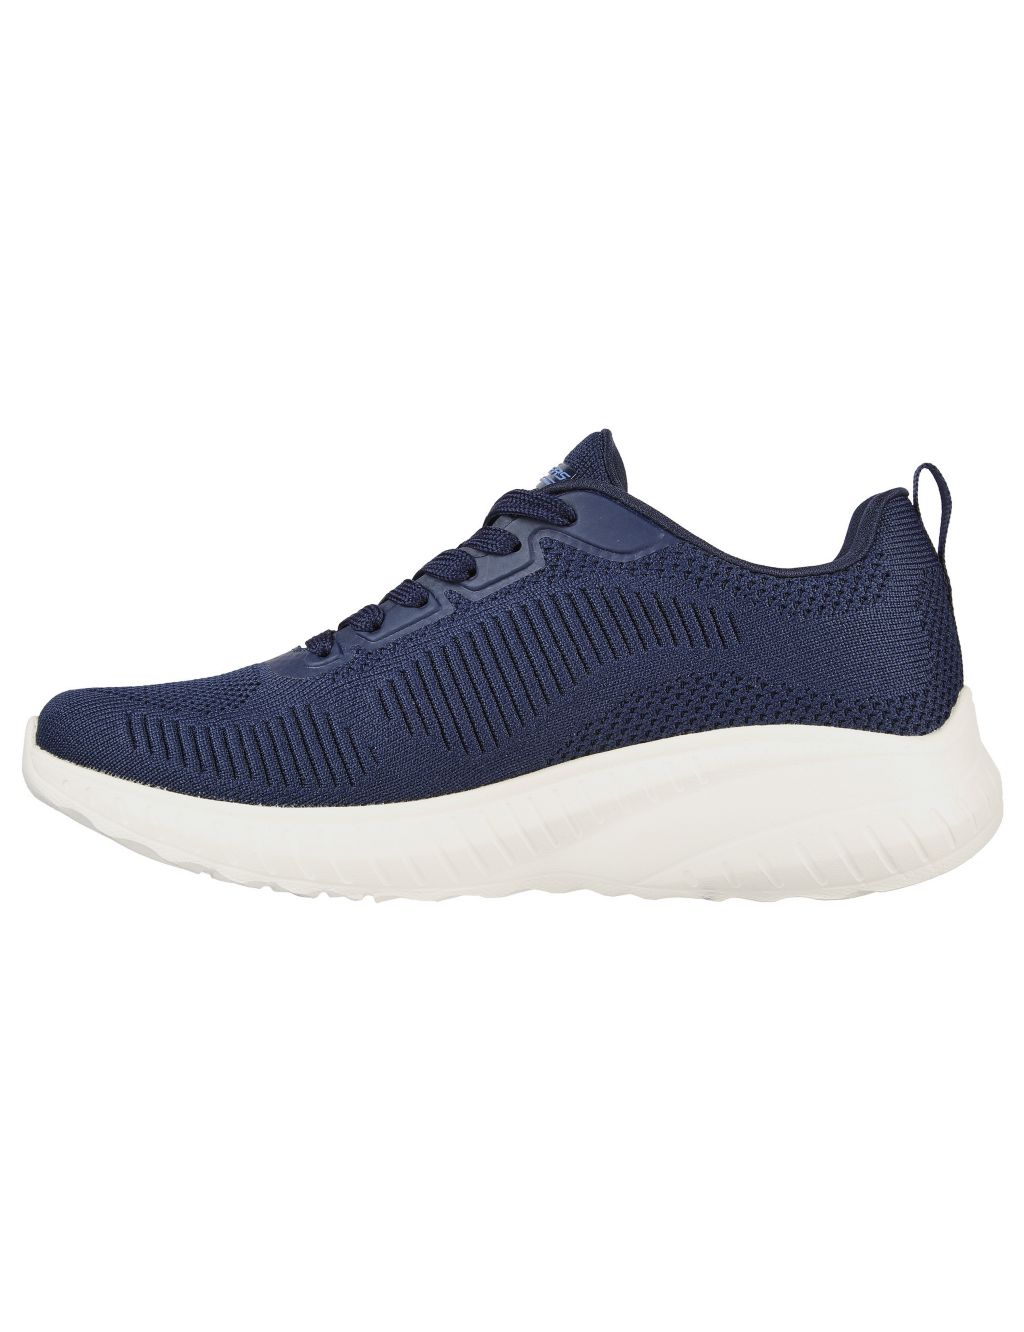 BOBS from Skechers™ Squad Chaos Trainers image 5